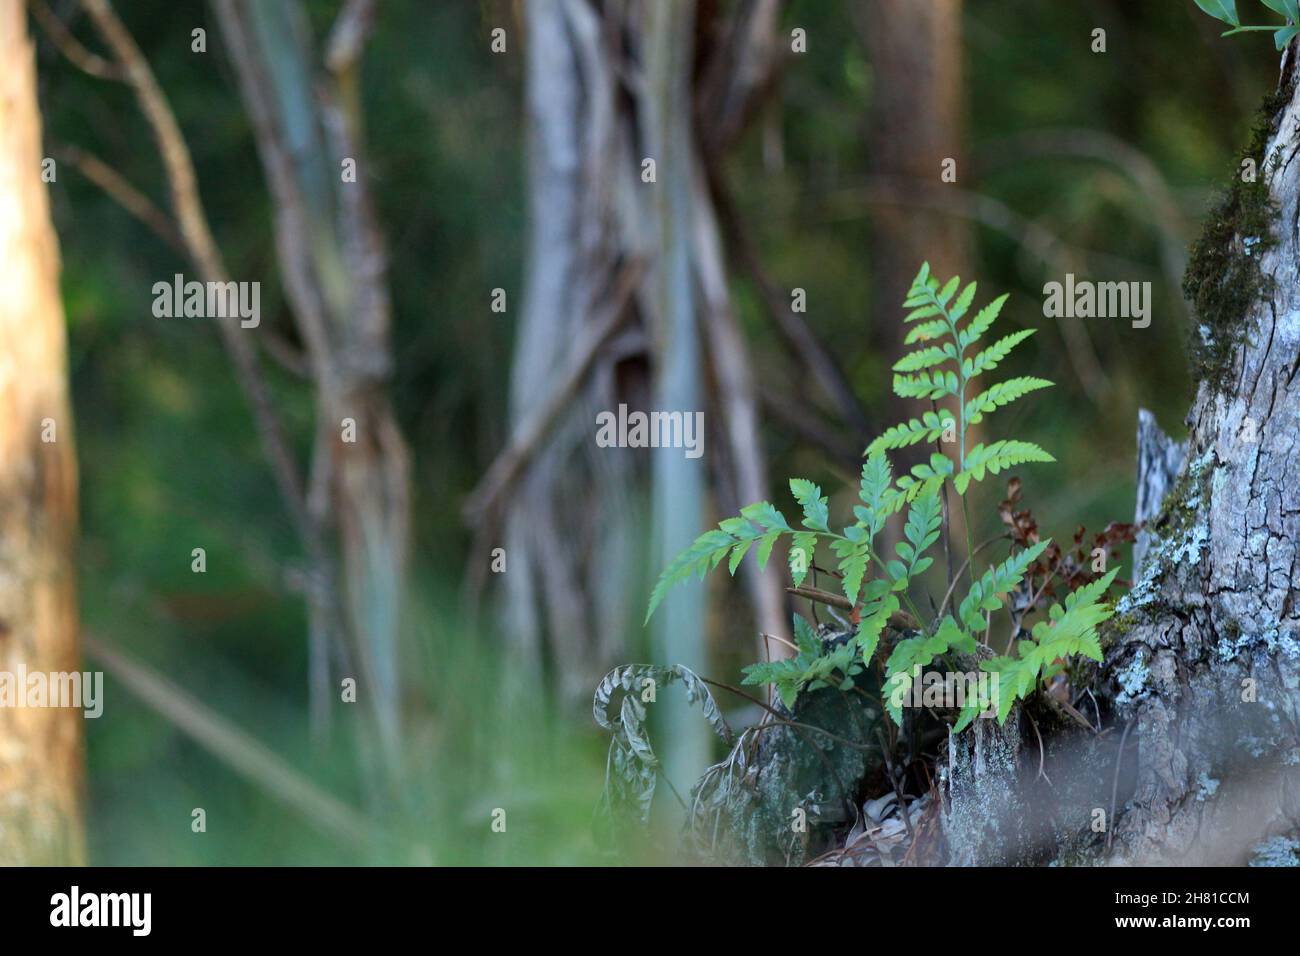 A small fern sprouts from the trunk of a tree. A background of tree trunks and branches. Stock Photo